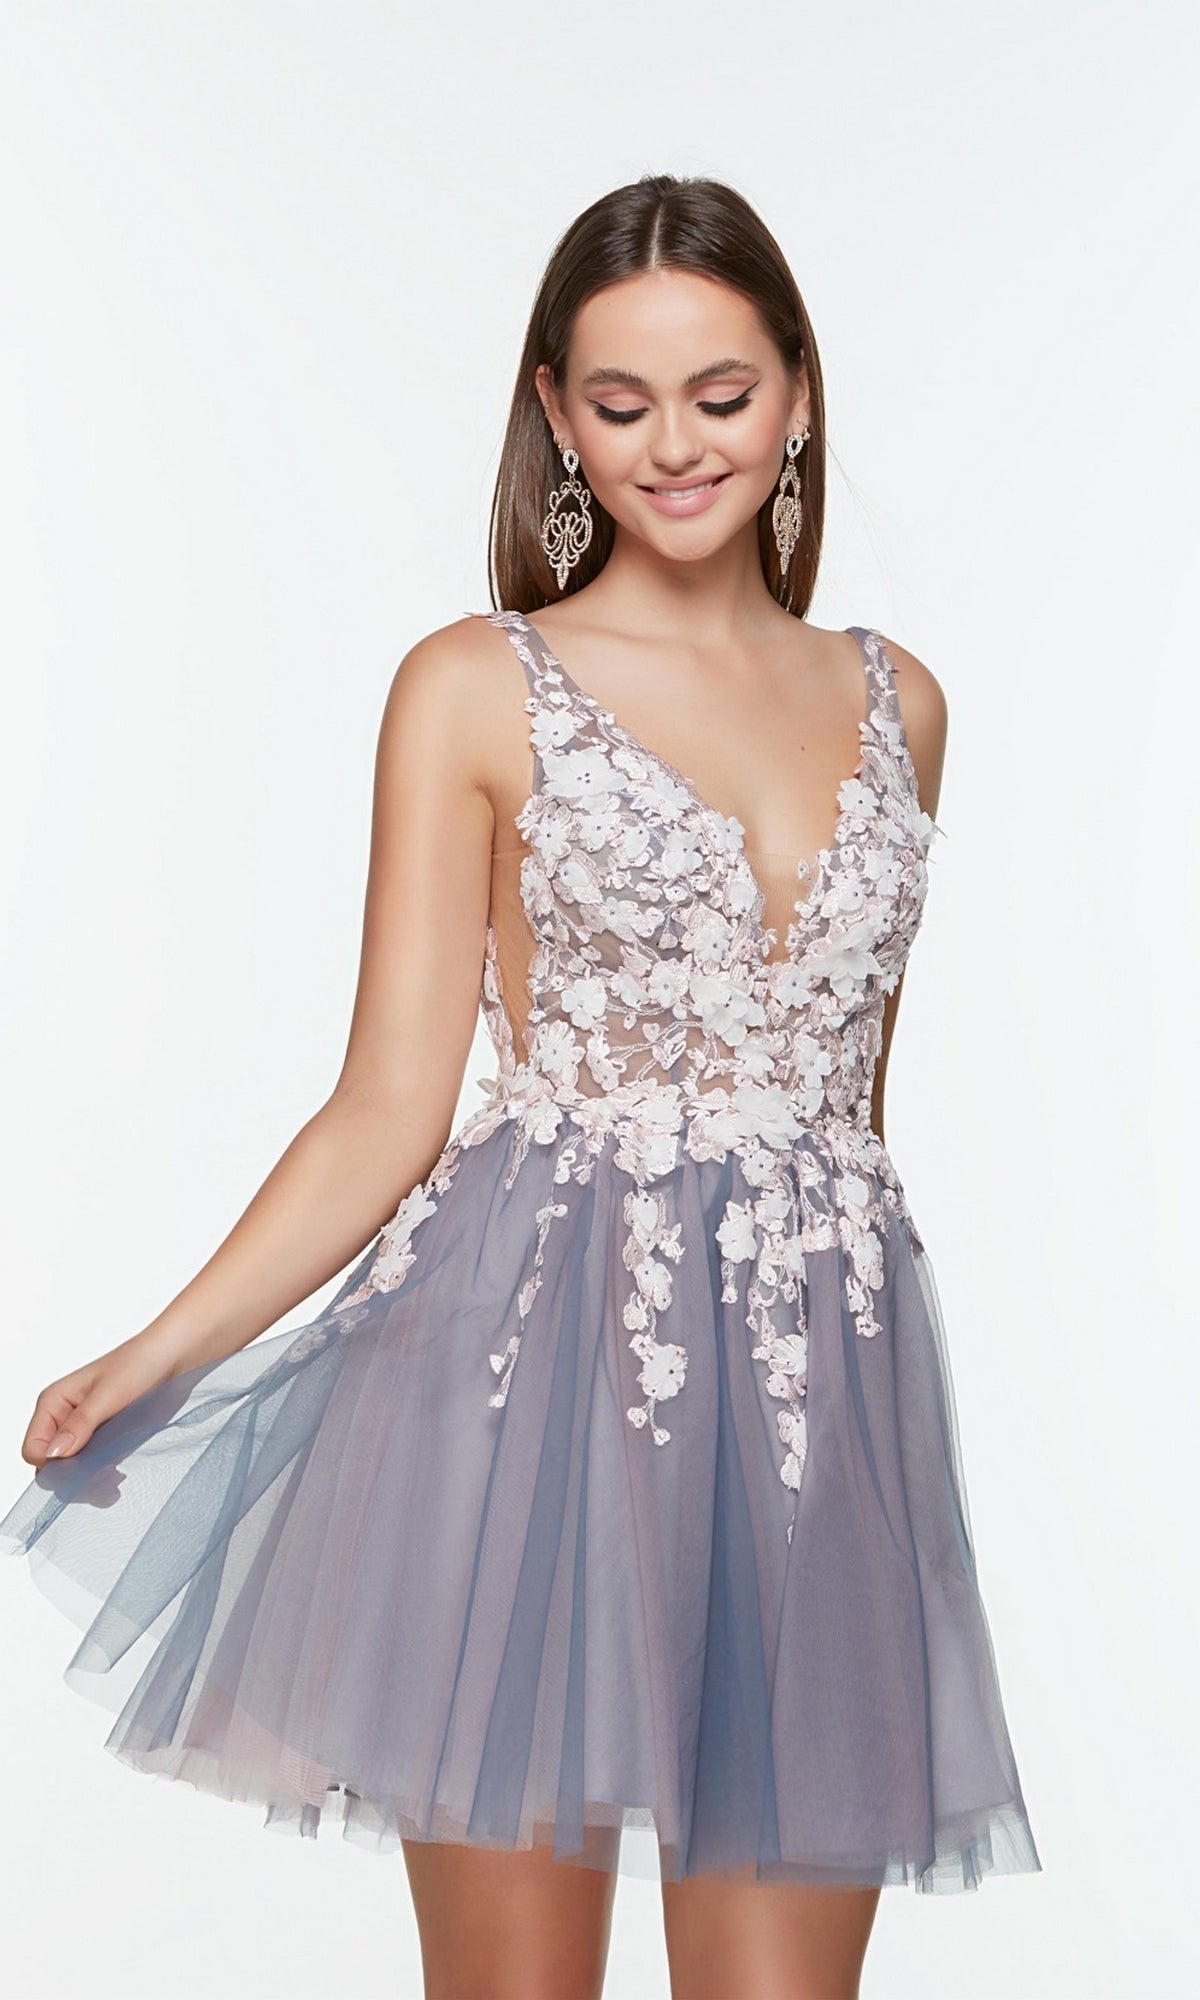 Storm Cloud/Pink Short Homecoming Dress By Alyce 3107